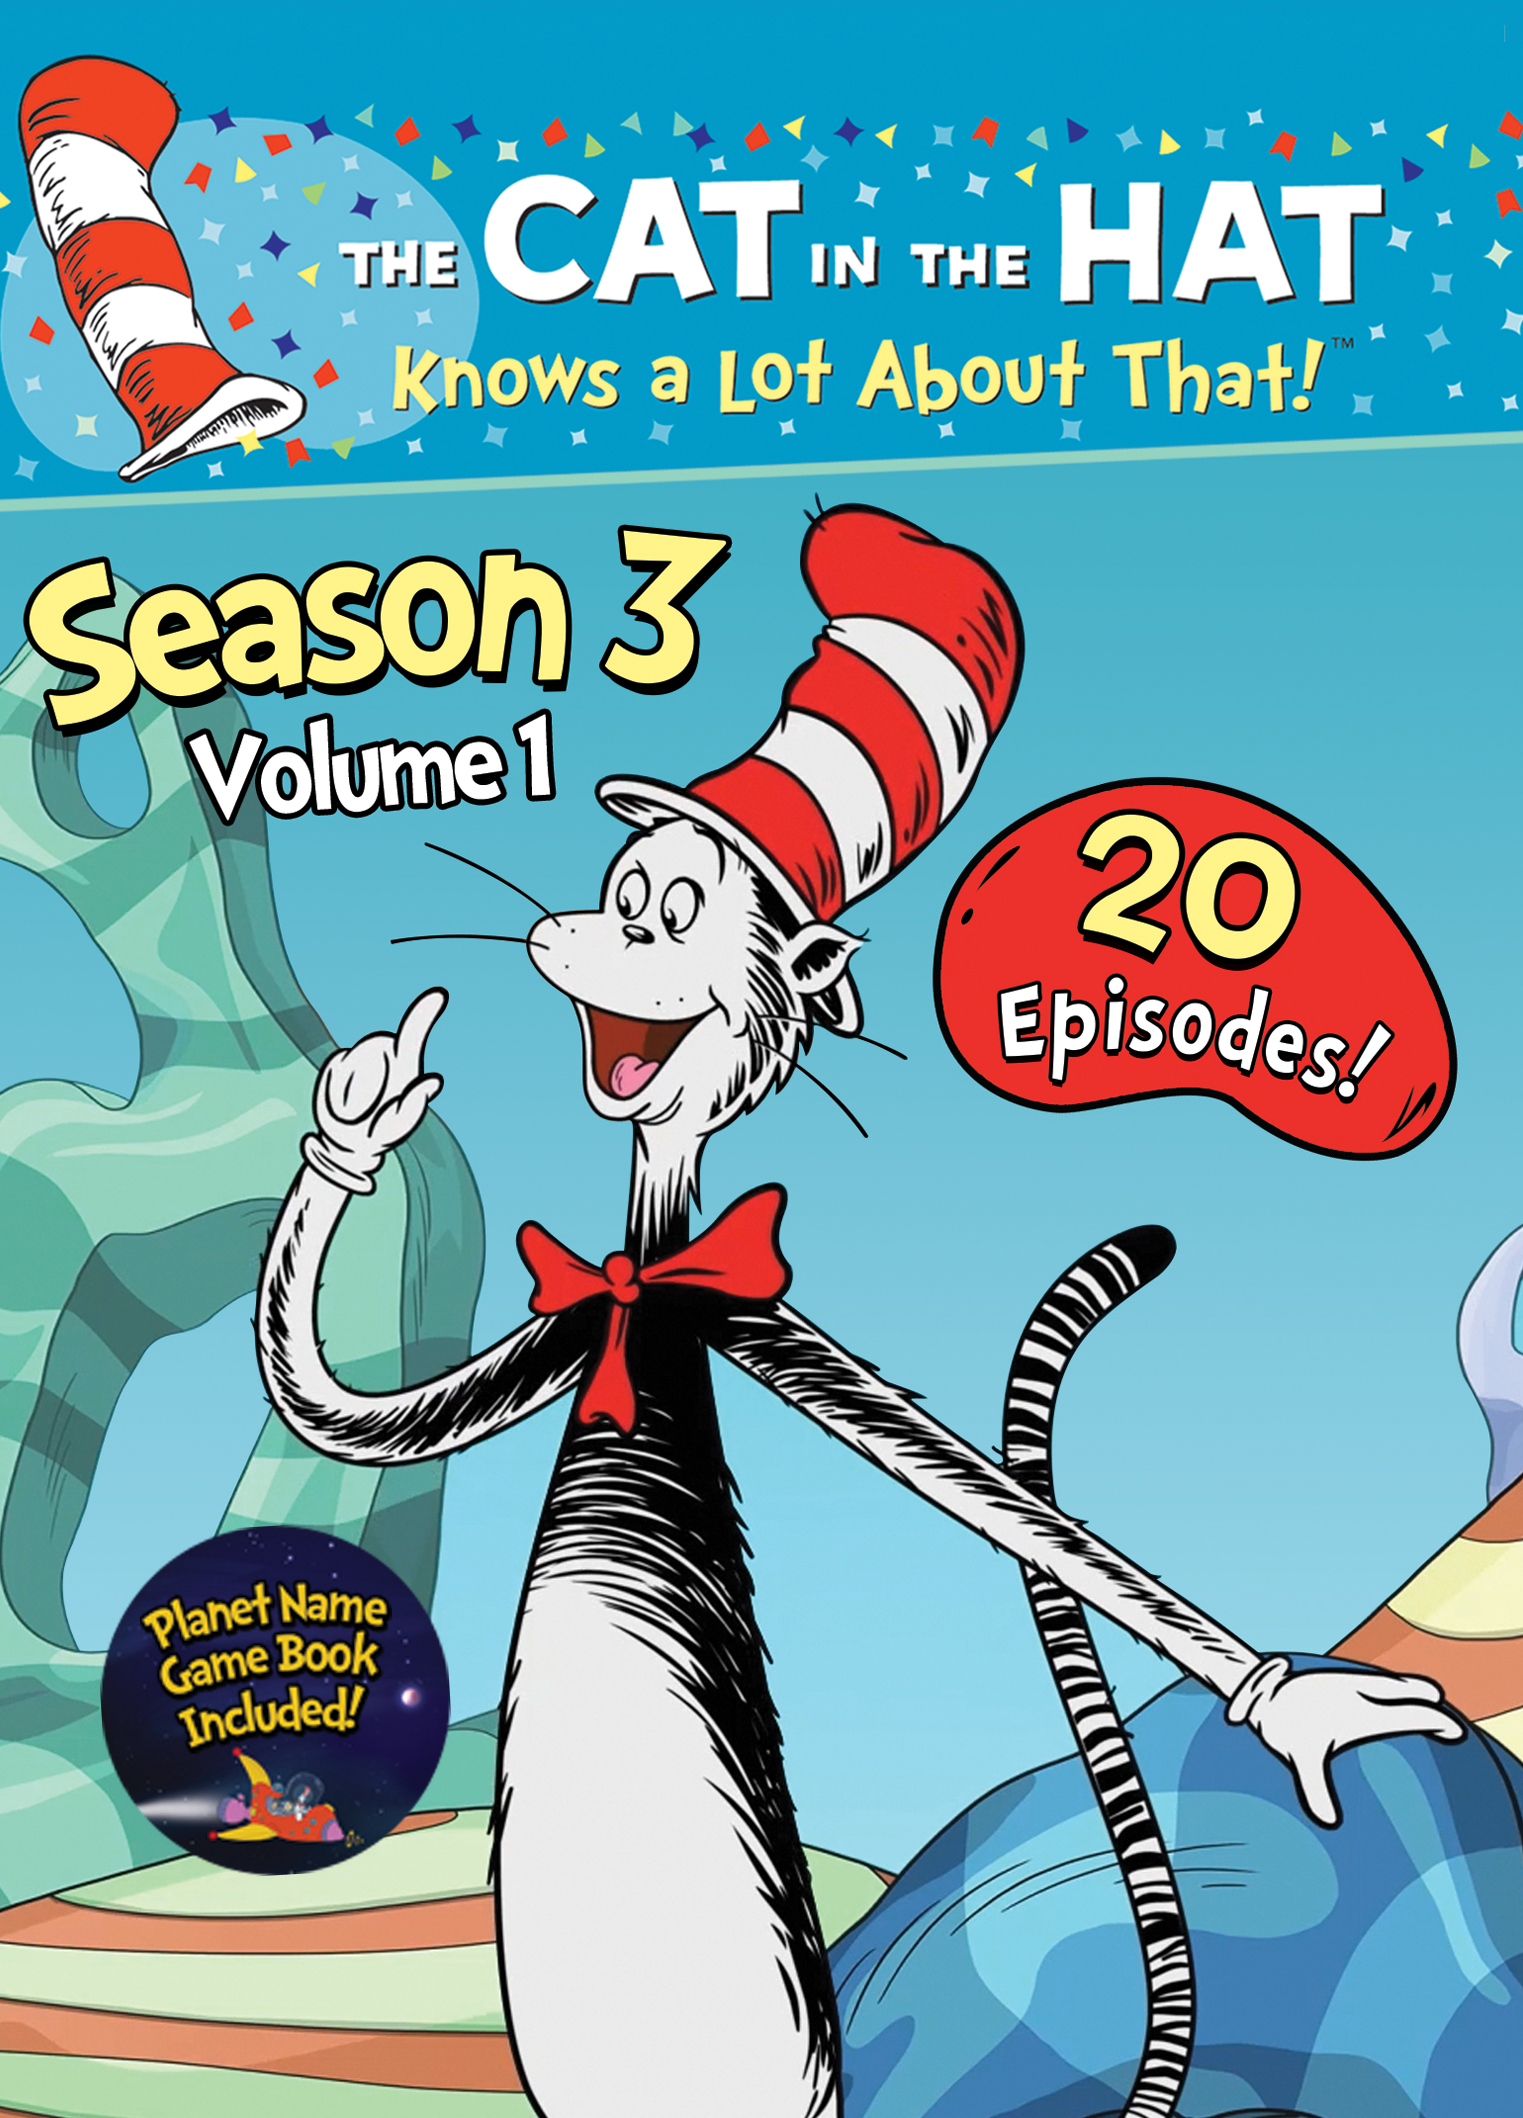 the-cat-in-the-hat-knows-a-lot-about-that-season-3-vol-1-dvd